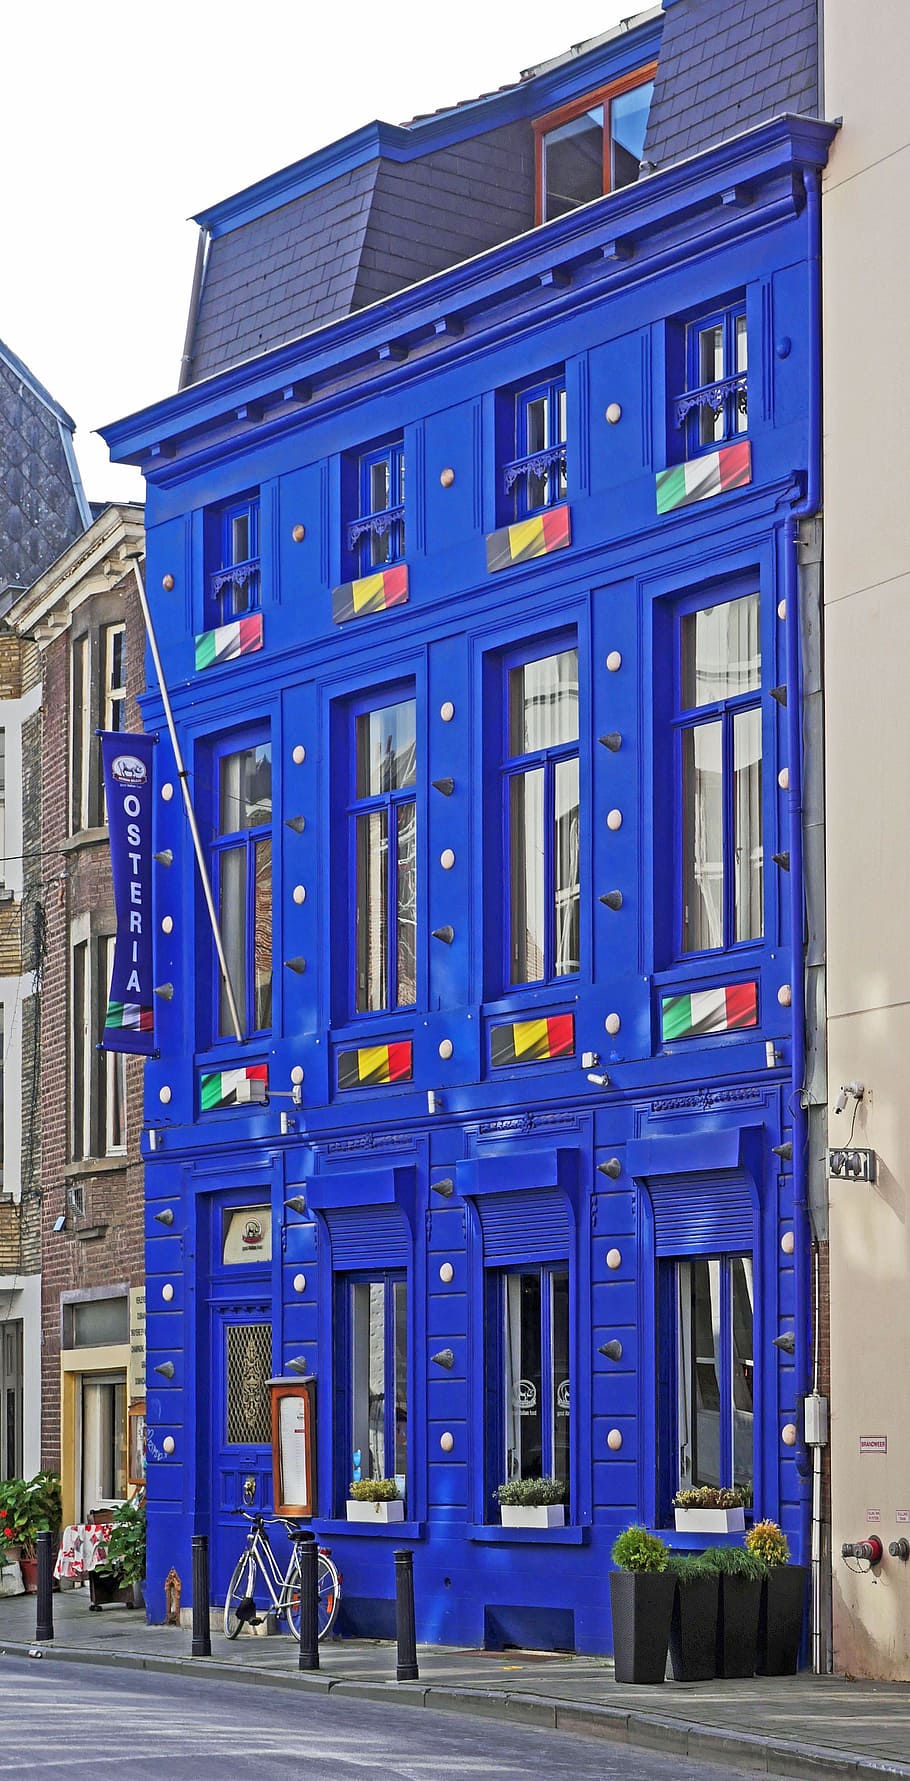 the blue house, gent, downtown, striking, row of houses, architecture, flanders, belgium, house facade, facade